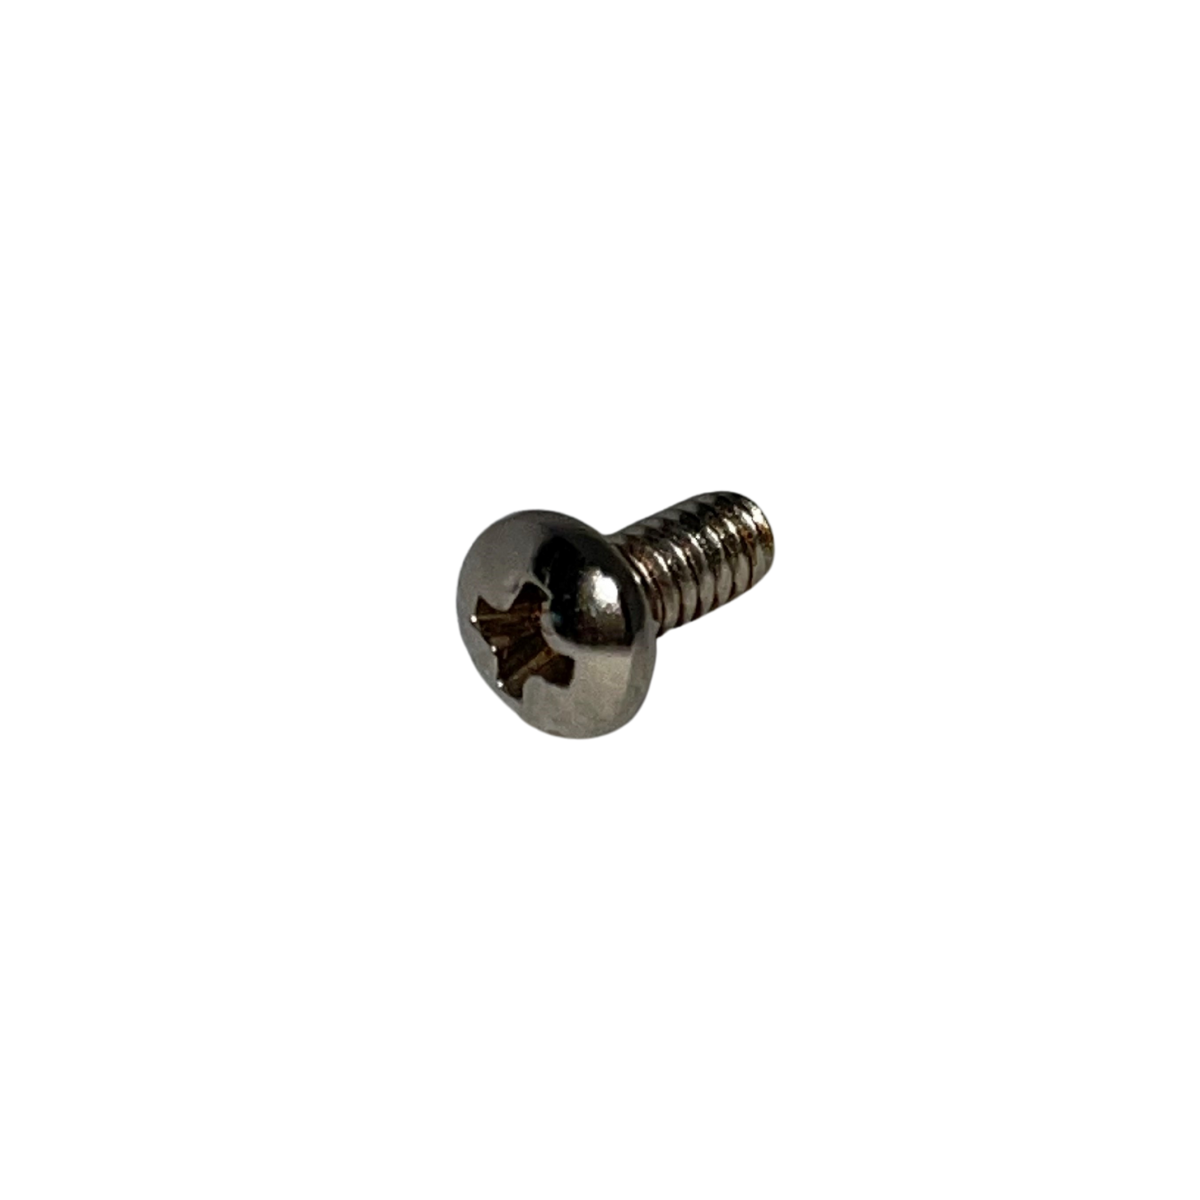 RTS Audiocom screw; for BP1000 PCB to top panel